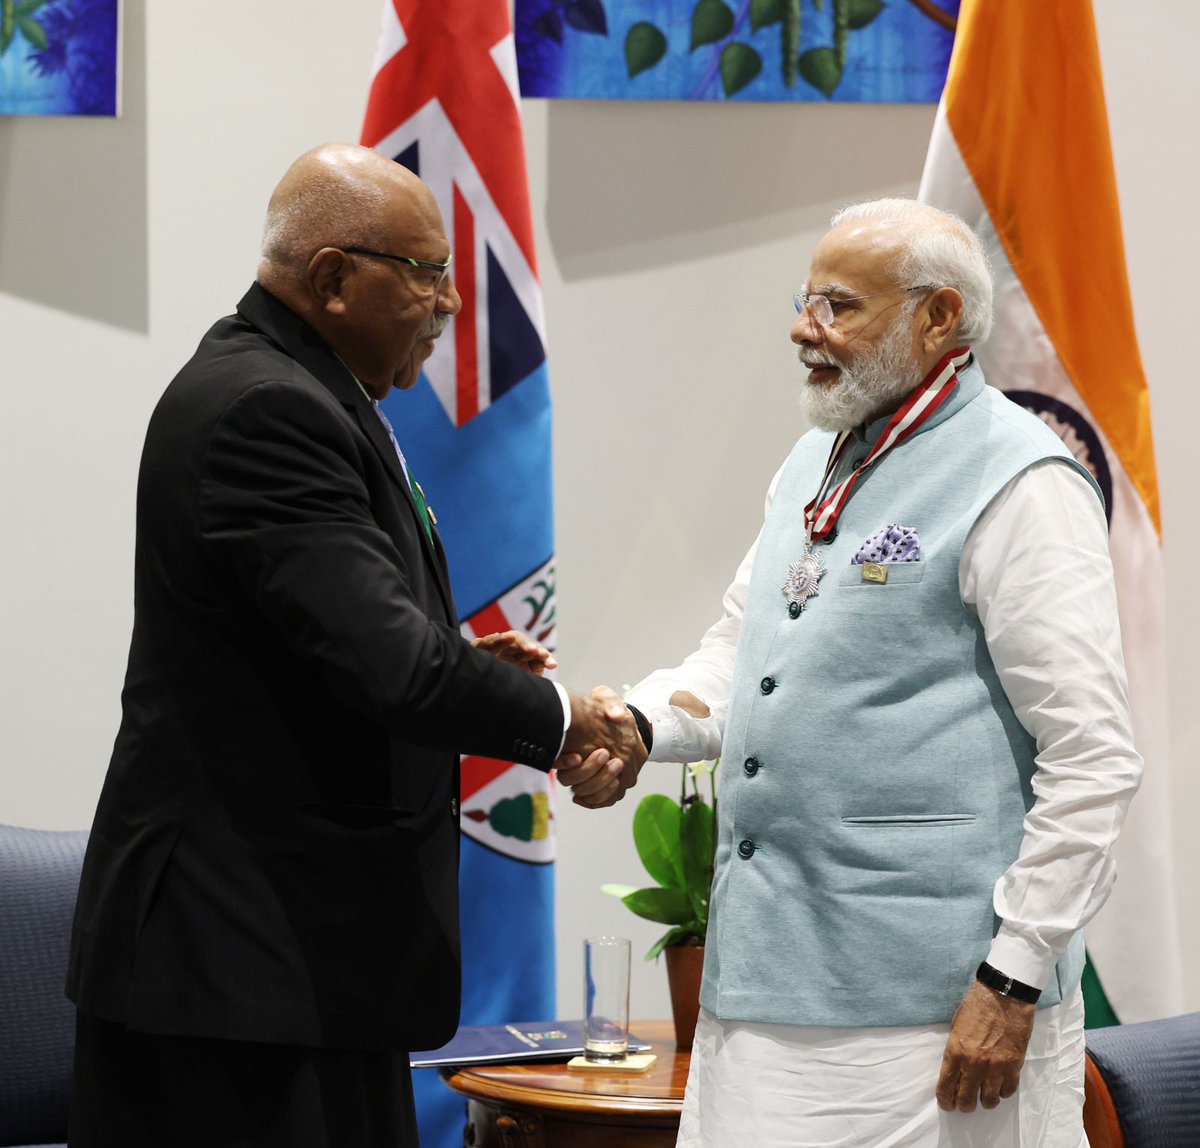 Fiji honours Indian prime minister @narendramodi with the highest honour of the country (Companion of the Order of Fiji) in Papua New Guinea

#PapuaNewGuinea 
#NarendraModi 
#PrimeMinister